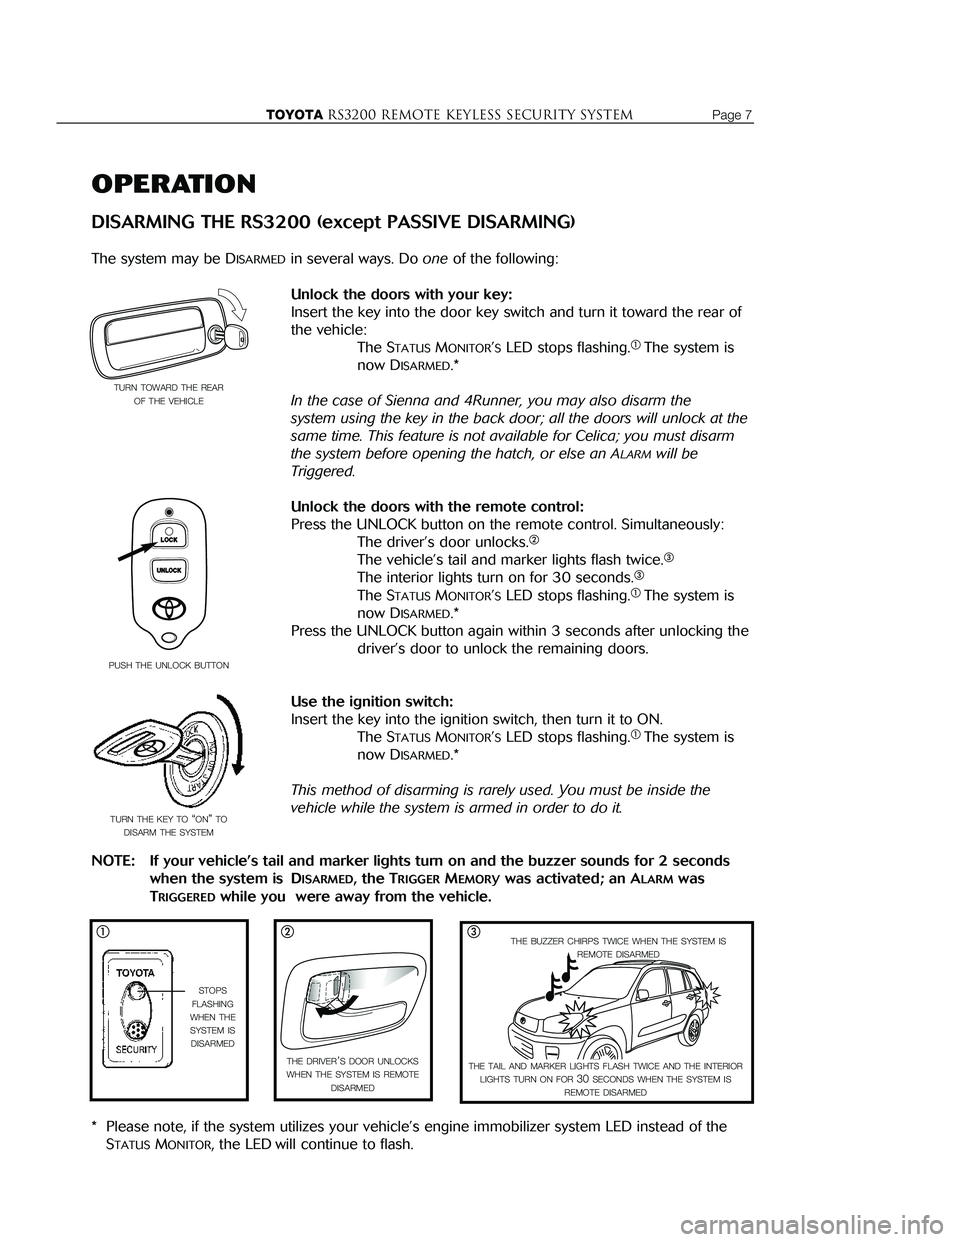 TOYOTA TACOMA 2002  Accessories, Audio & Navigation (in English) Page 14                    TOYOTARS3200 REMOTE KEYLESS Security systemTOYOTARS3200 remote keyless Security systemPage 7
OPERATION
DISARMING THE RS3200 (except PASSIVE DISARMING)
The system may be DISA